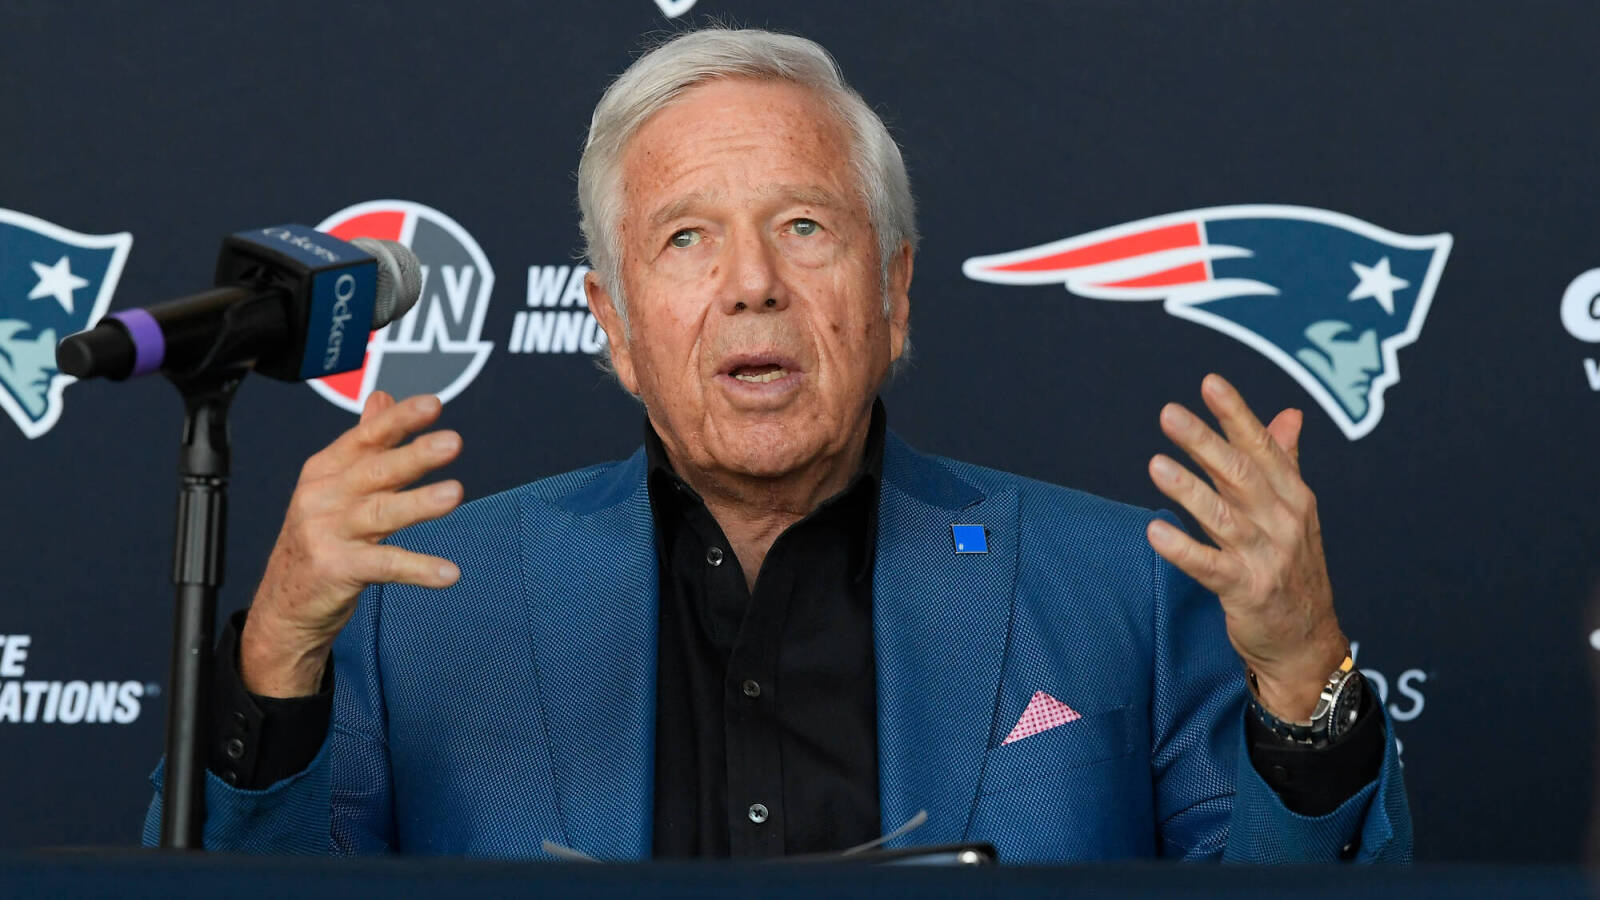 Patriots owner Robert Kraft discusses 'The Dynasty' criticisms